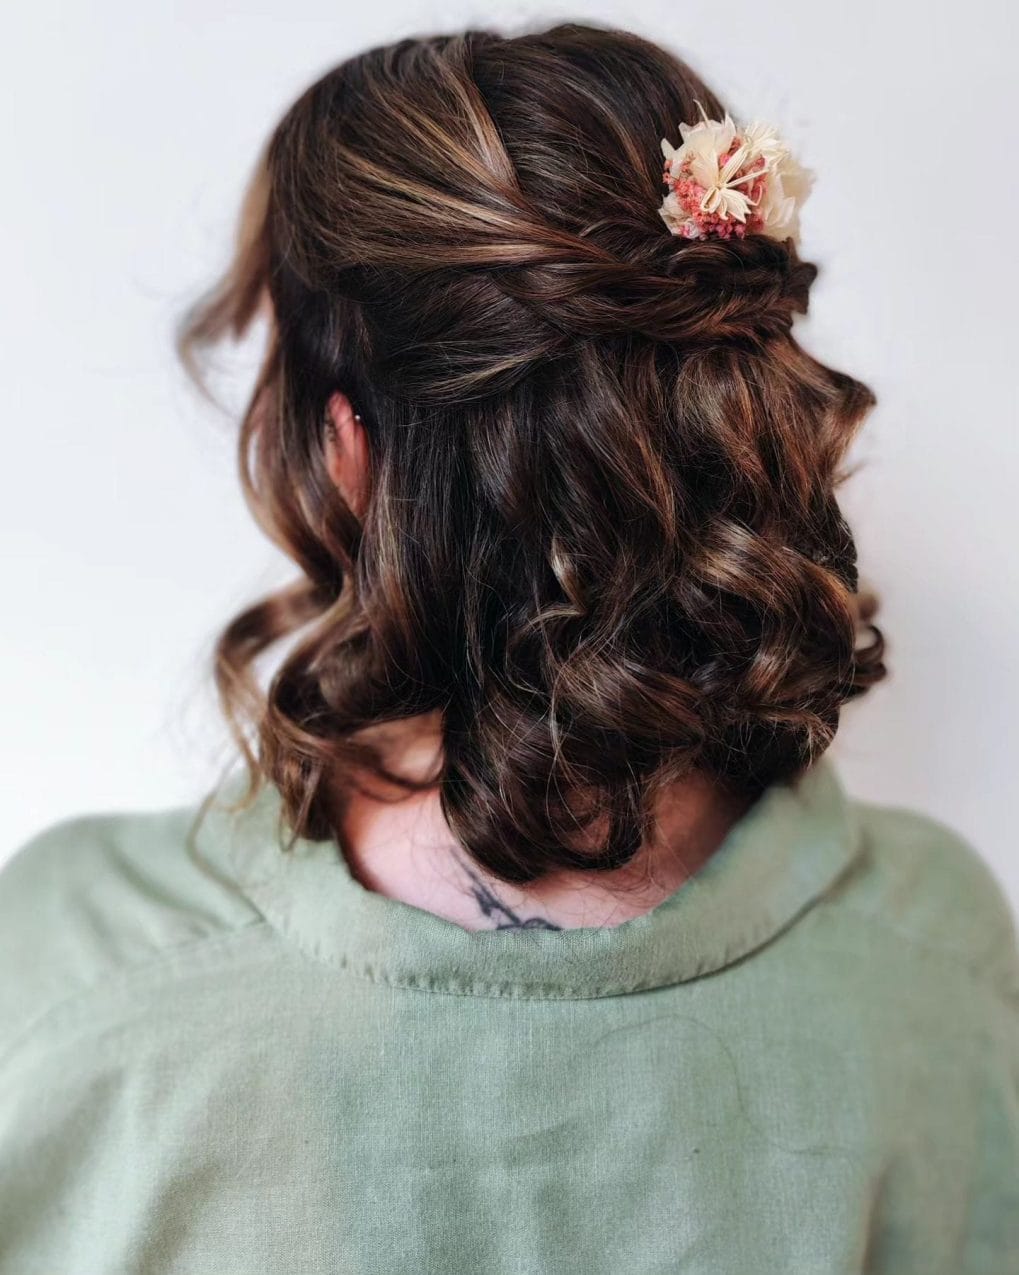 Rich chocolate curls in an intricate side-swept updo with a floral accessory for a birthday soirÃ©e.